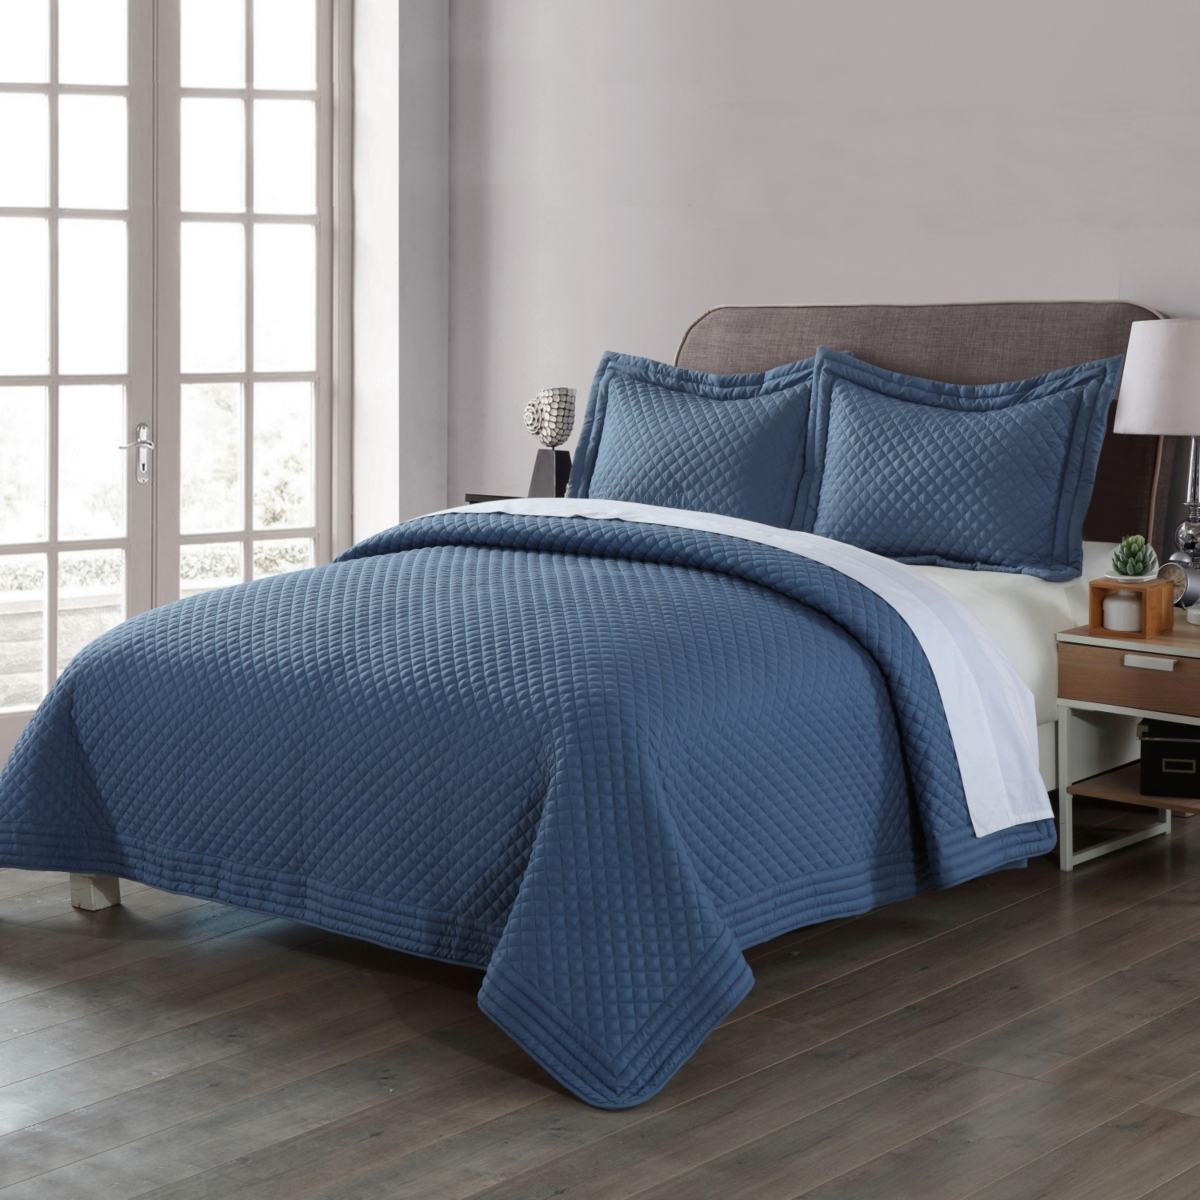 Lotus Home Diamondesque Water And Stain Resistant Microfiber Quilt In Blue